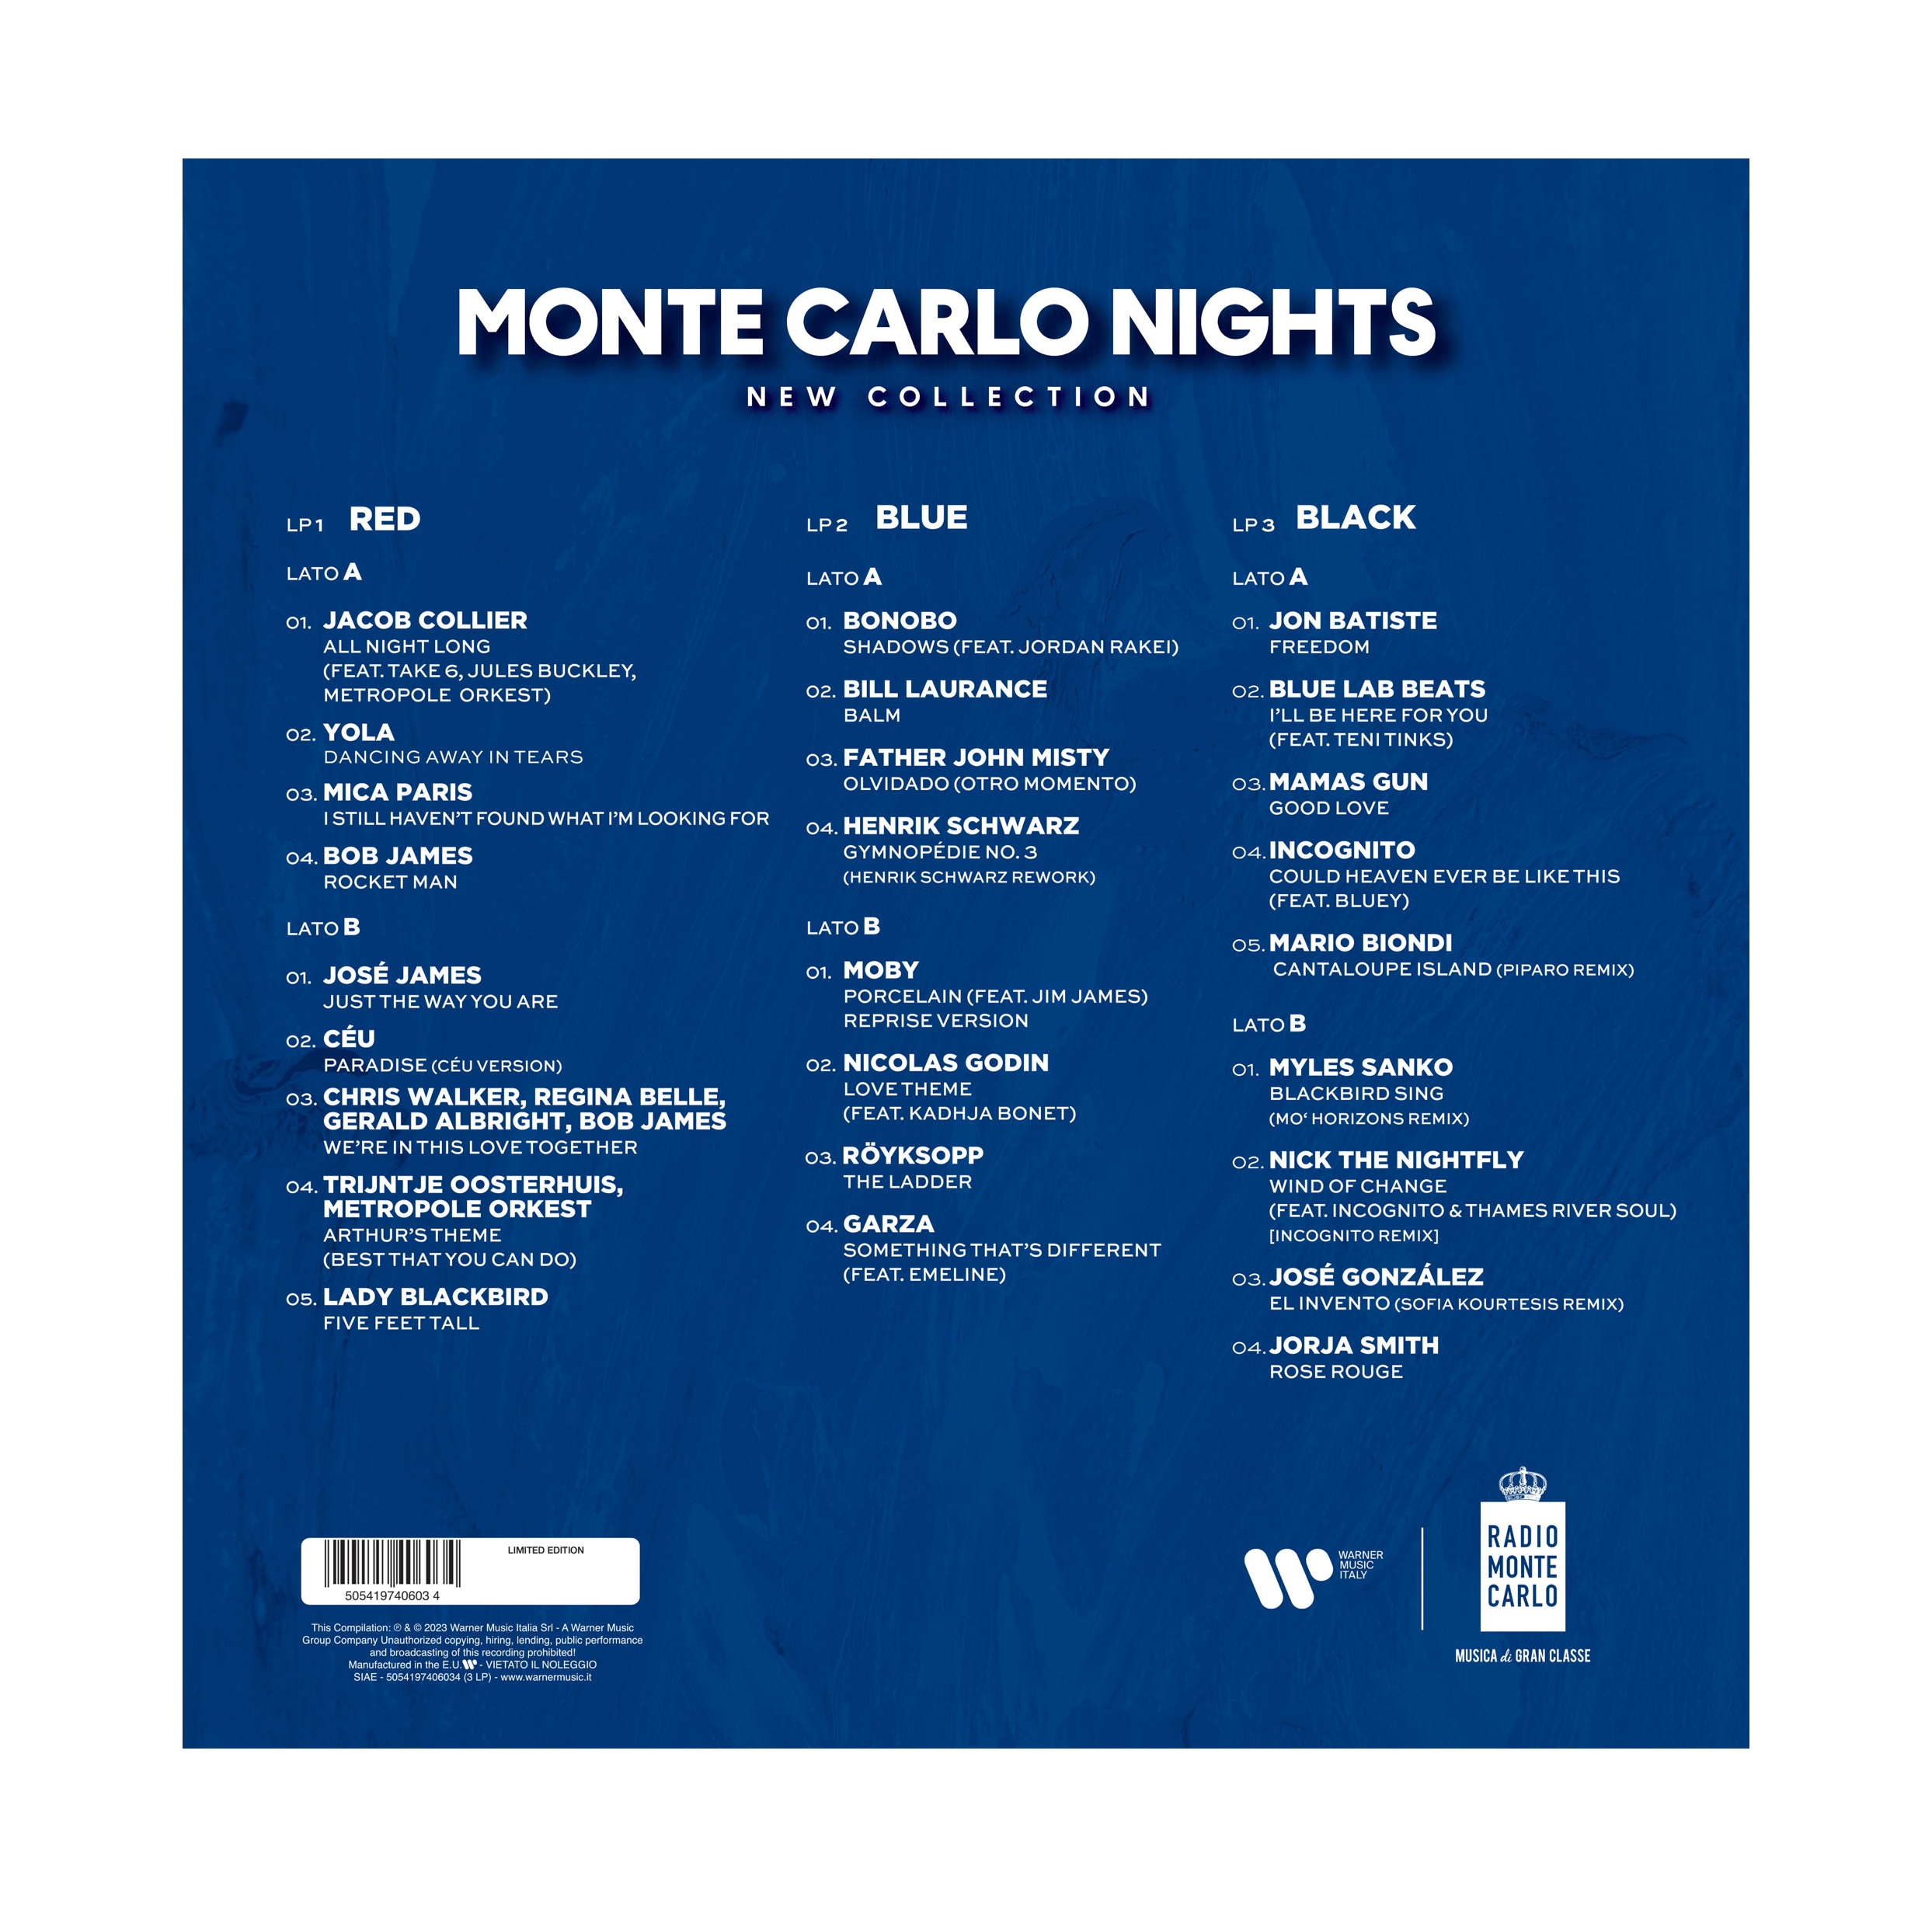 Monte Carlo Nights New Collection (3 LP)